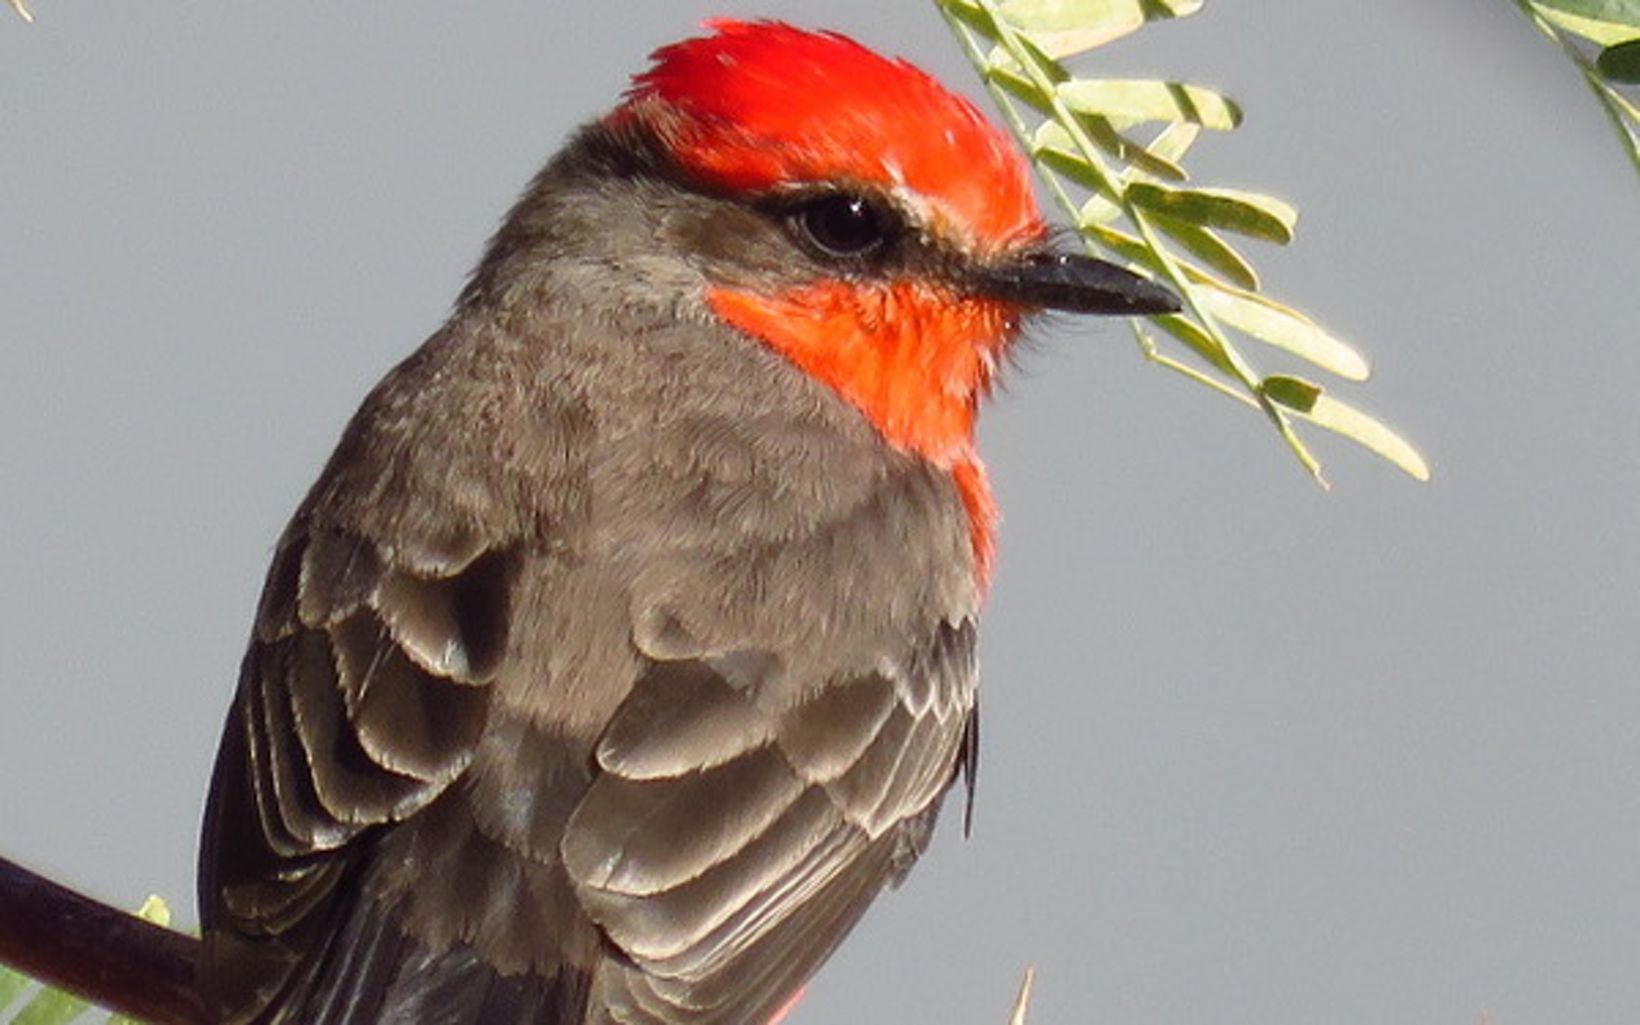 A gray and red bird on a branch.